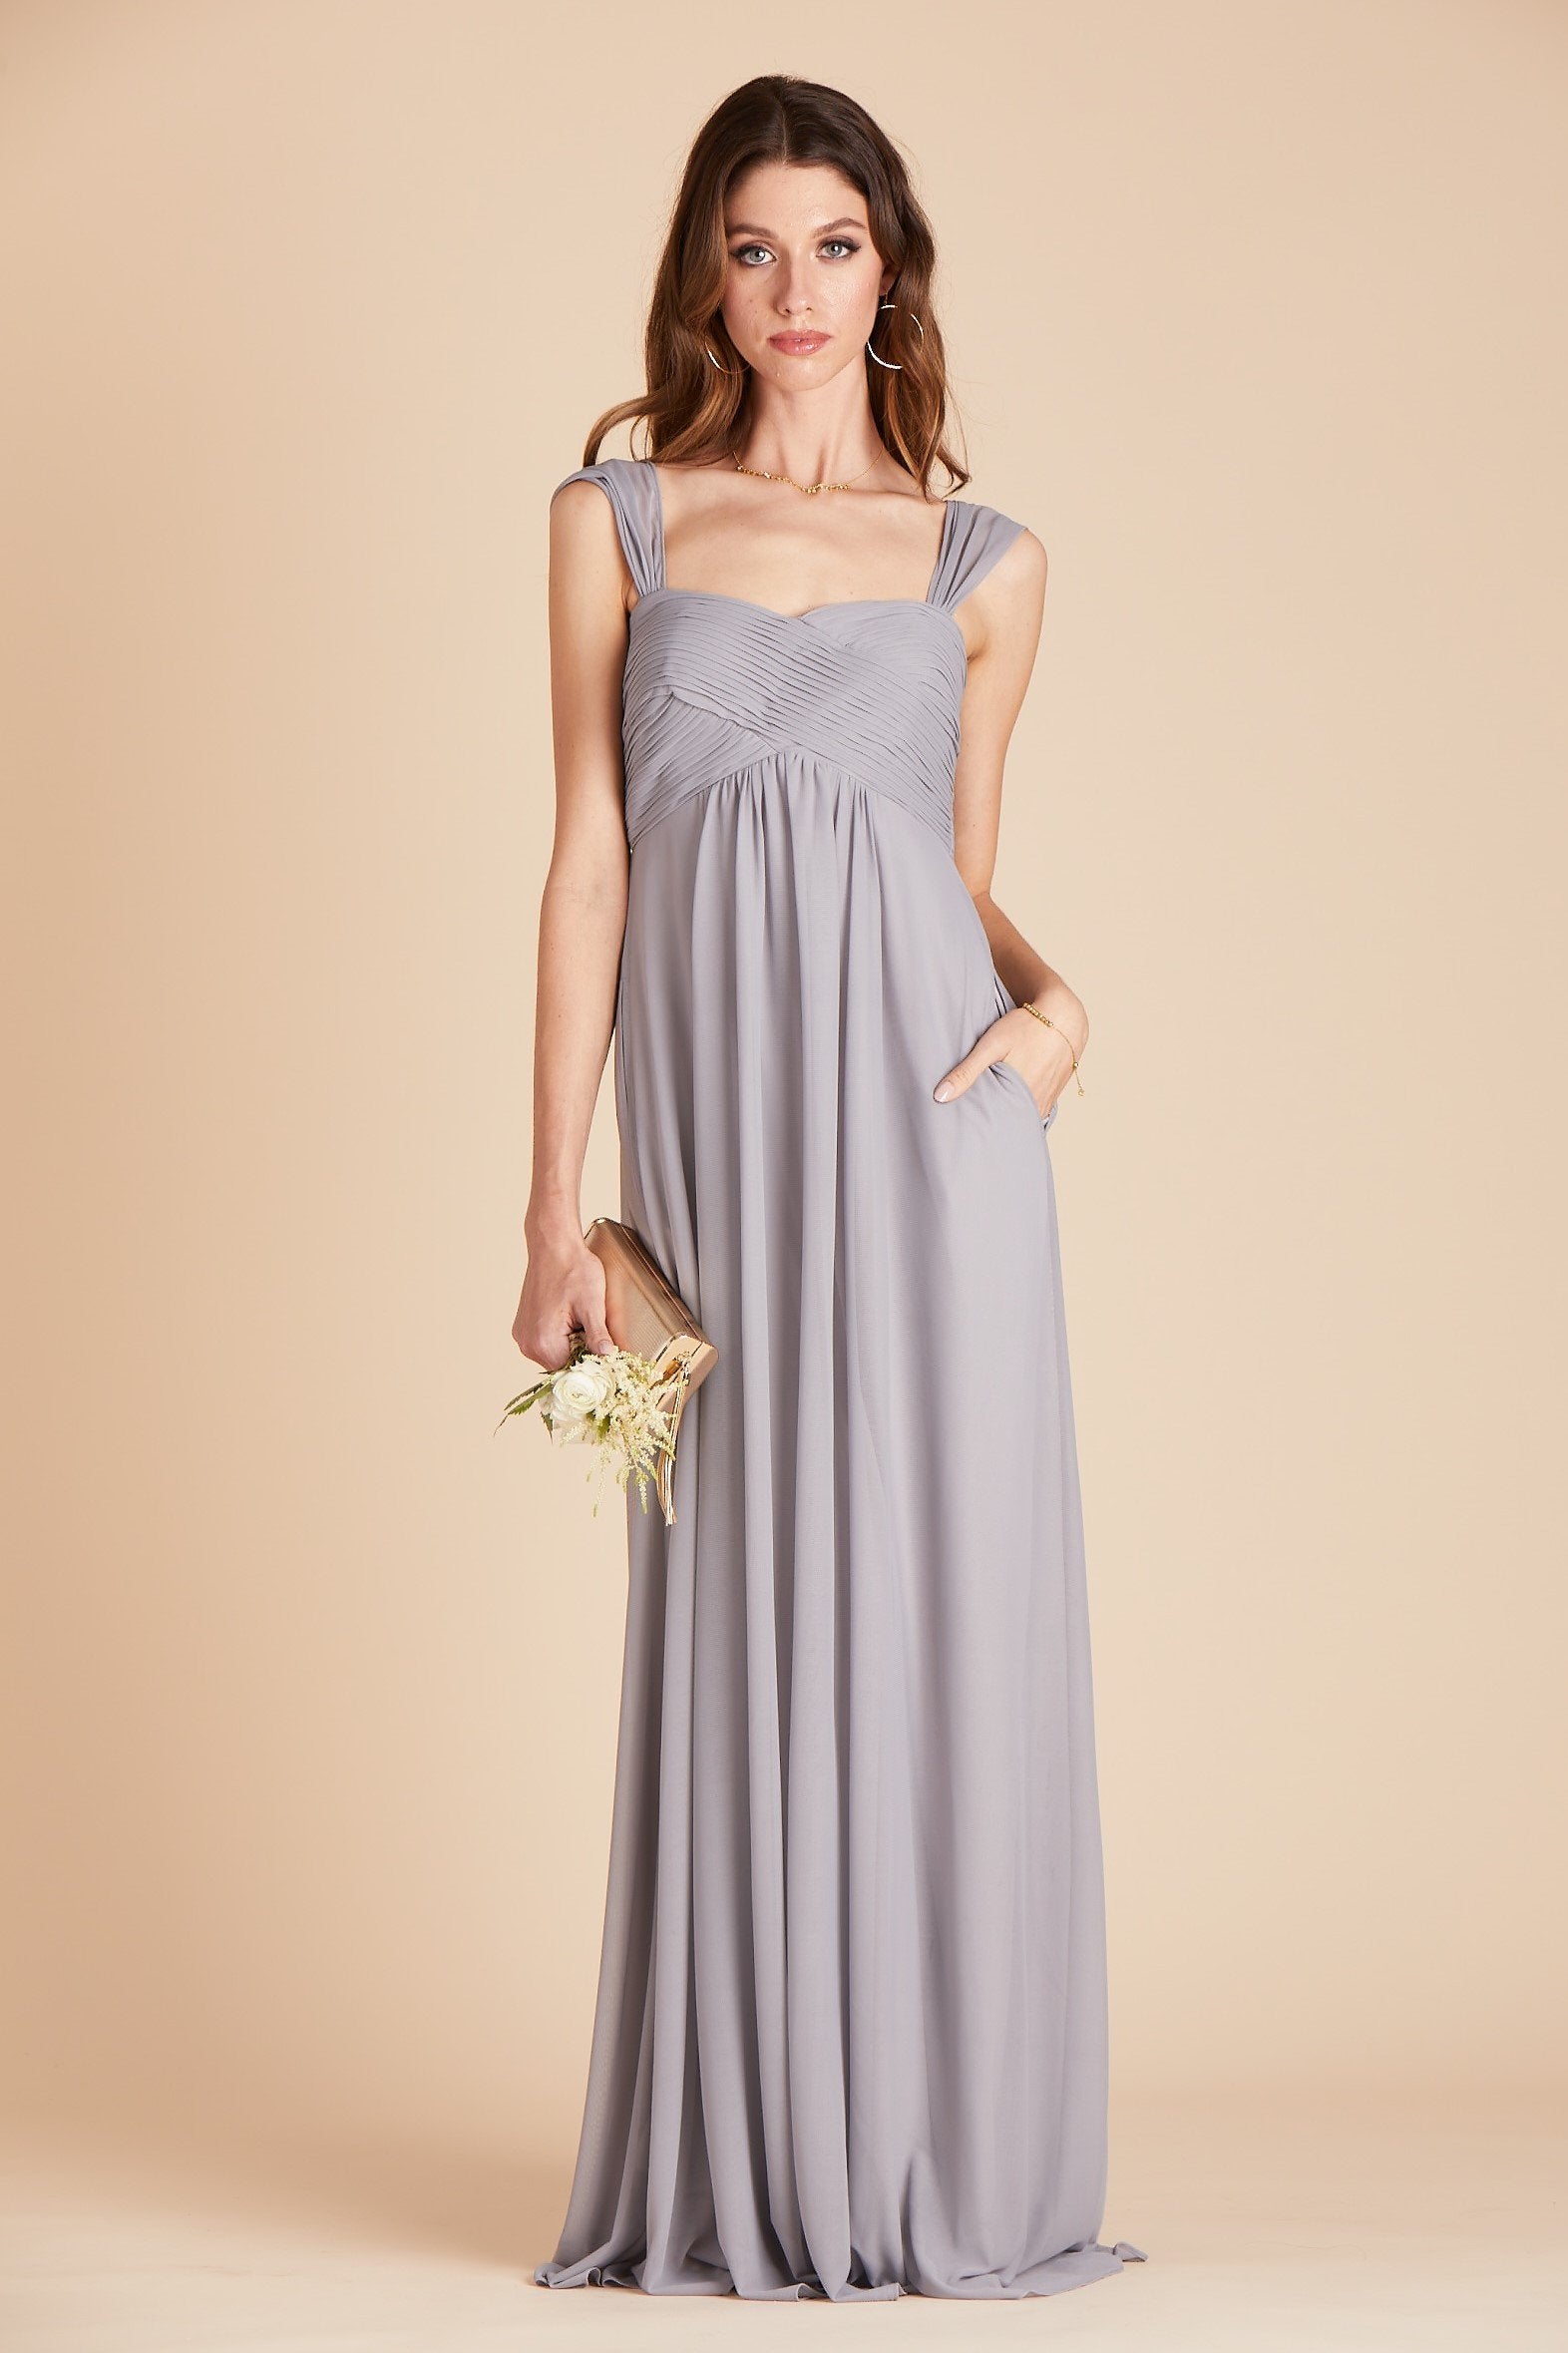 Maria convertible bridesmaids dress in silver mesh by Birdy Grey, front view with hand in pocket